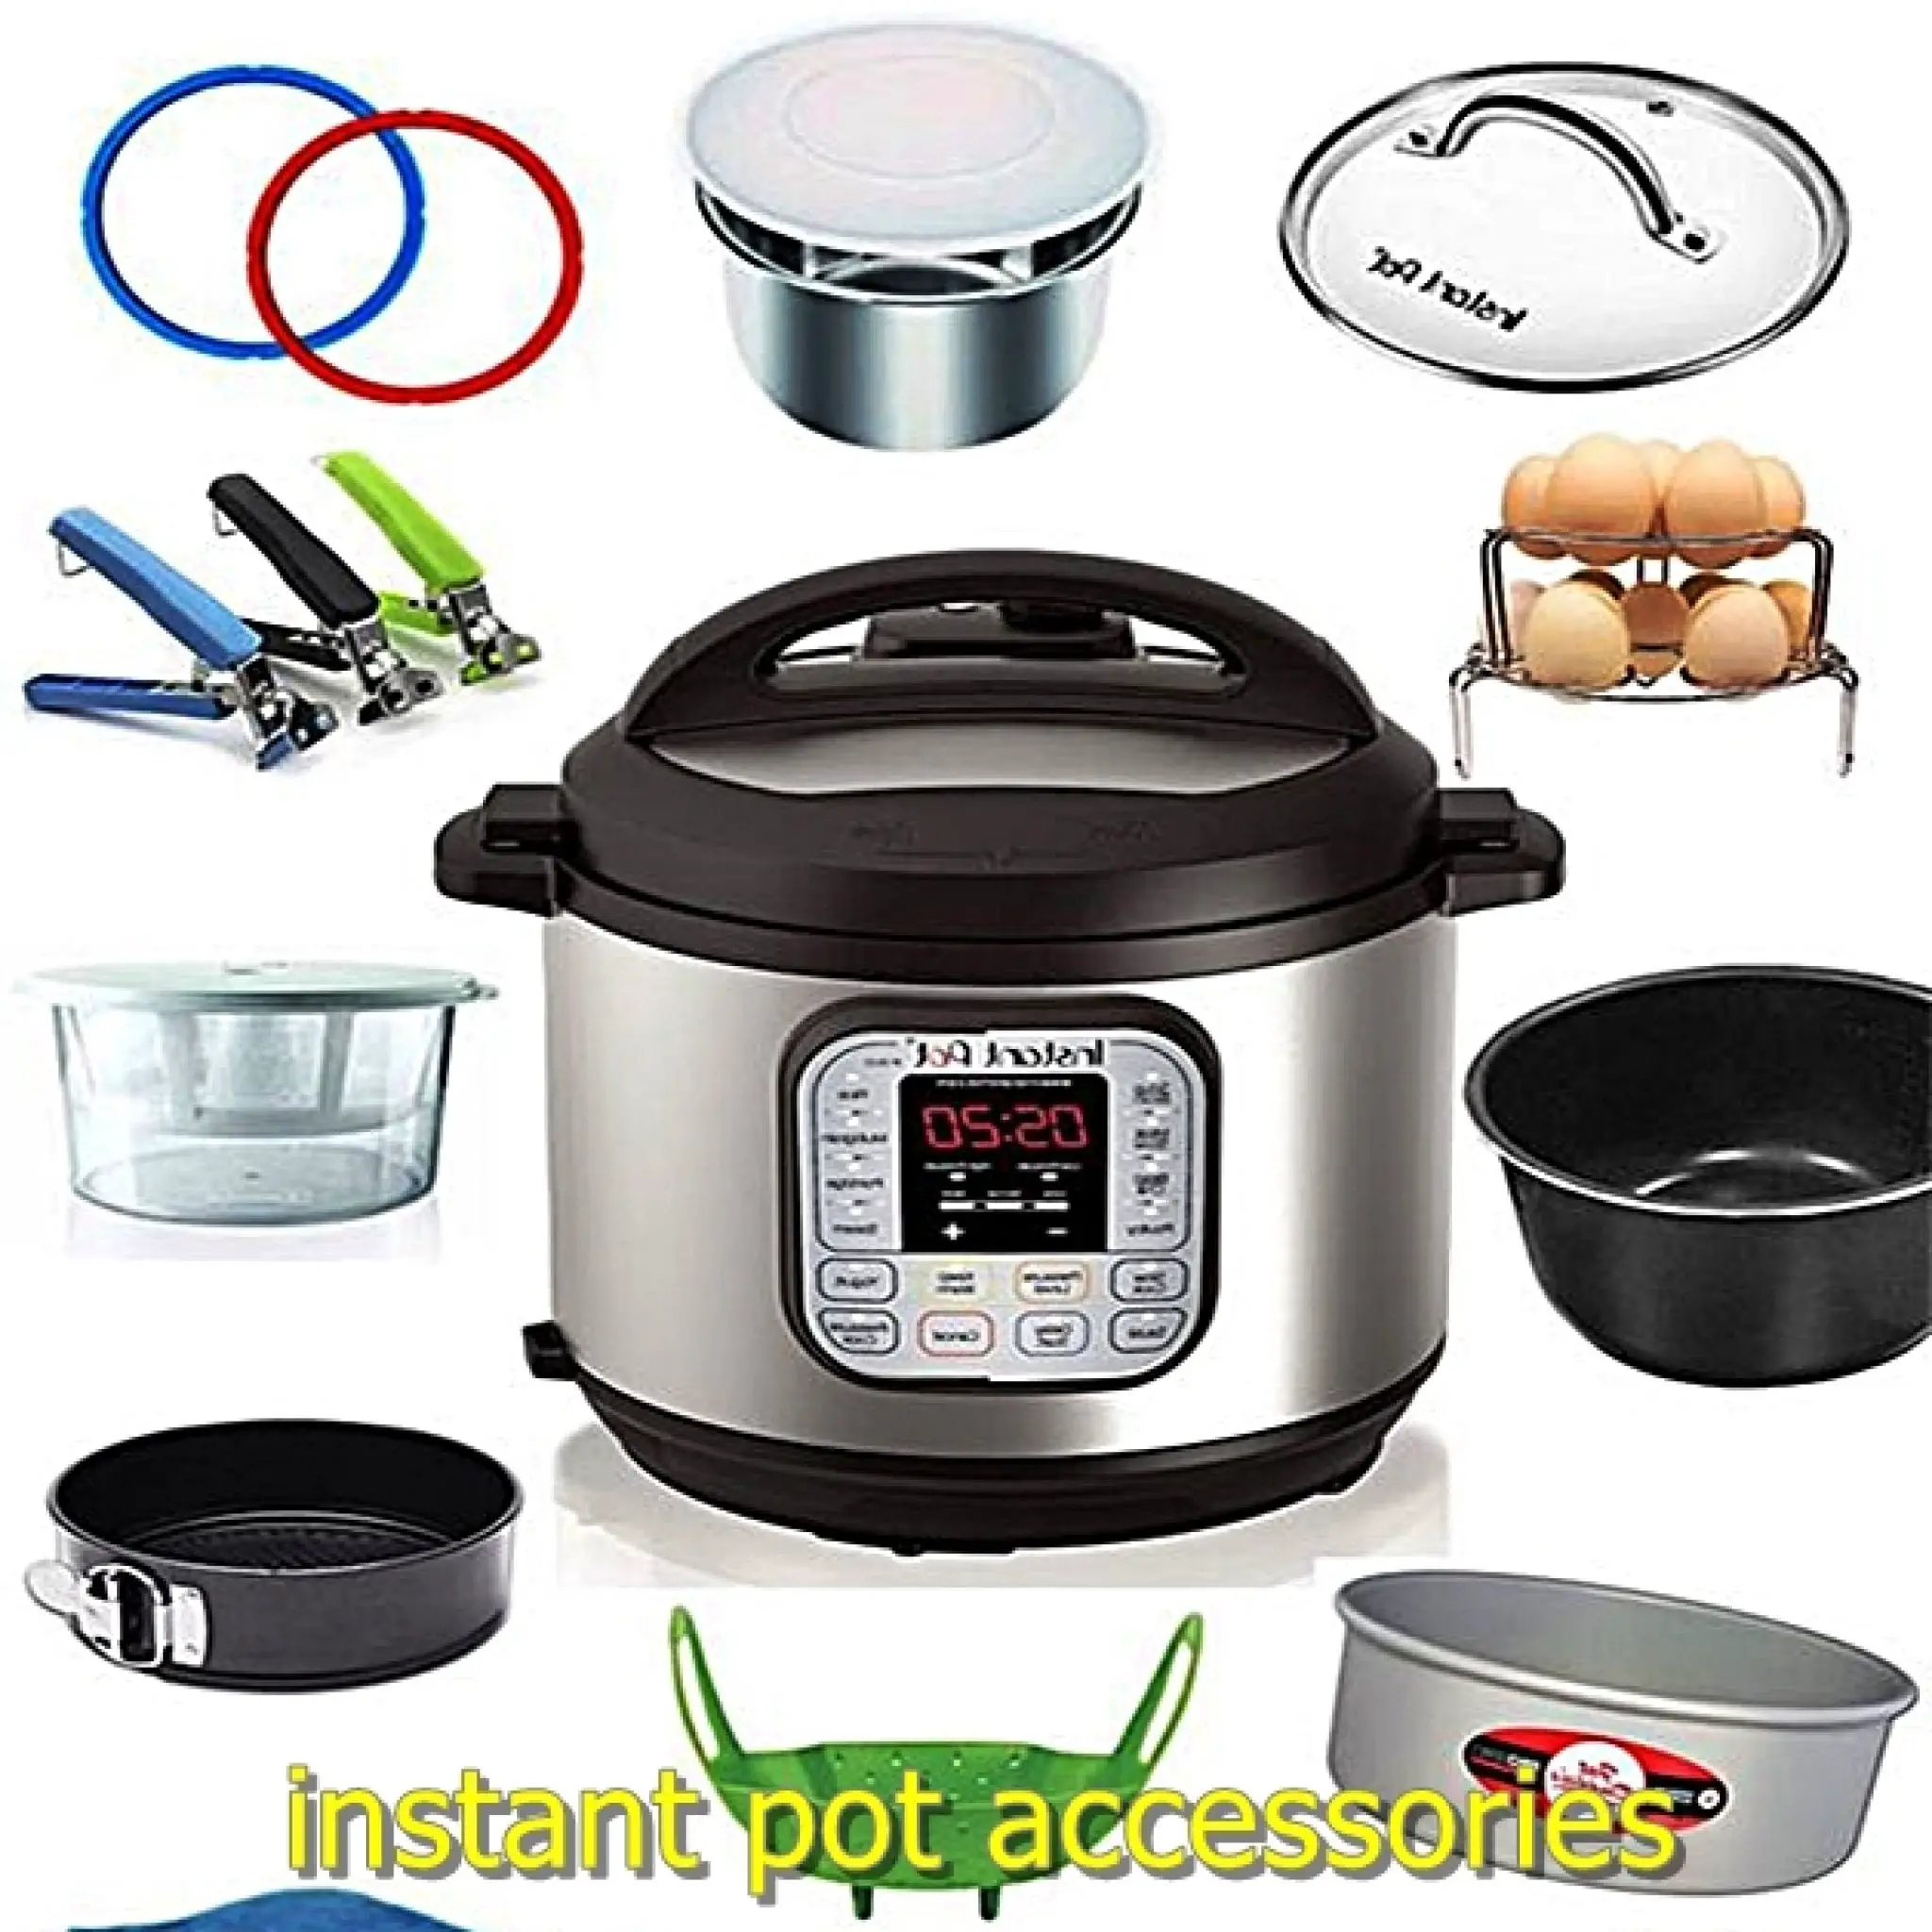 Best 8 Instant Pot Accessories on Amazon to Buy in 2020